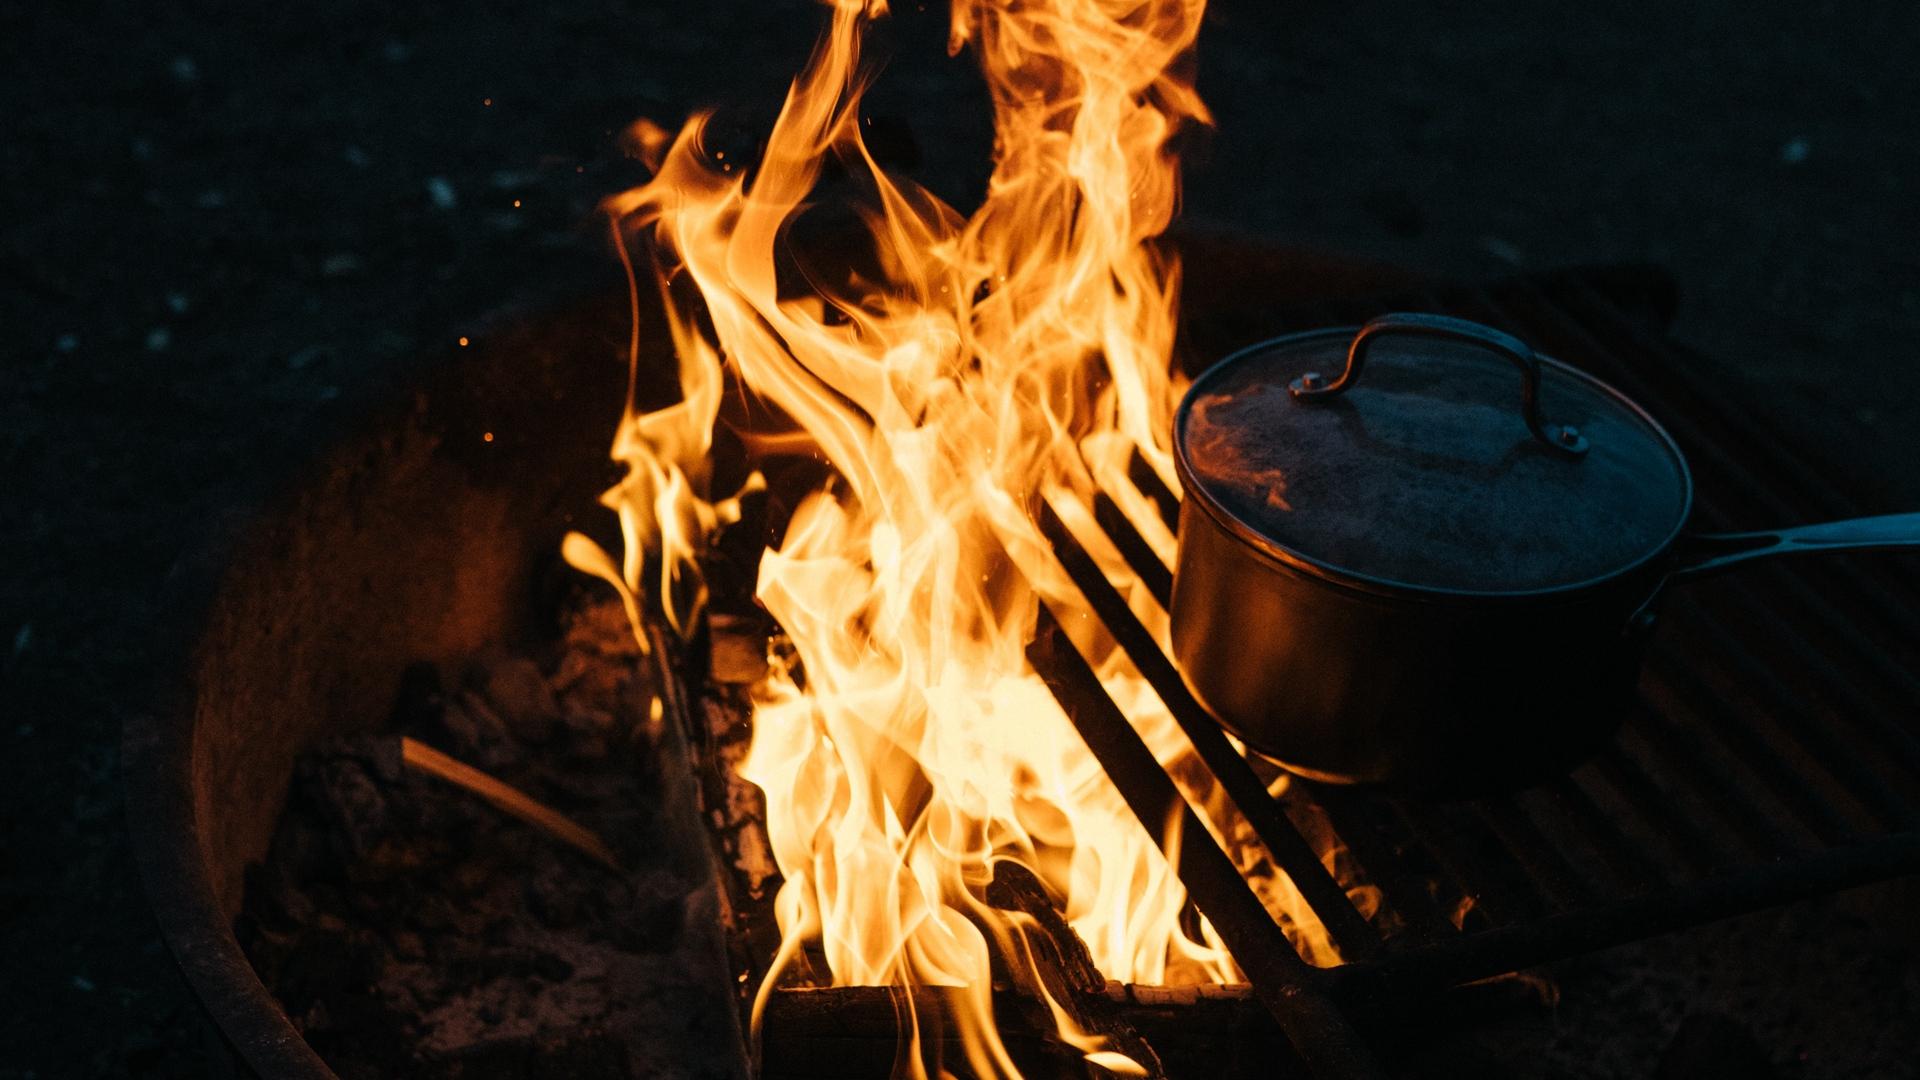 Download wallpaper 1920x1080 campfire, camping, fire, dishes, night